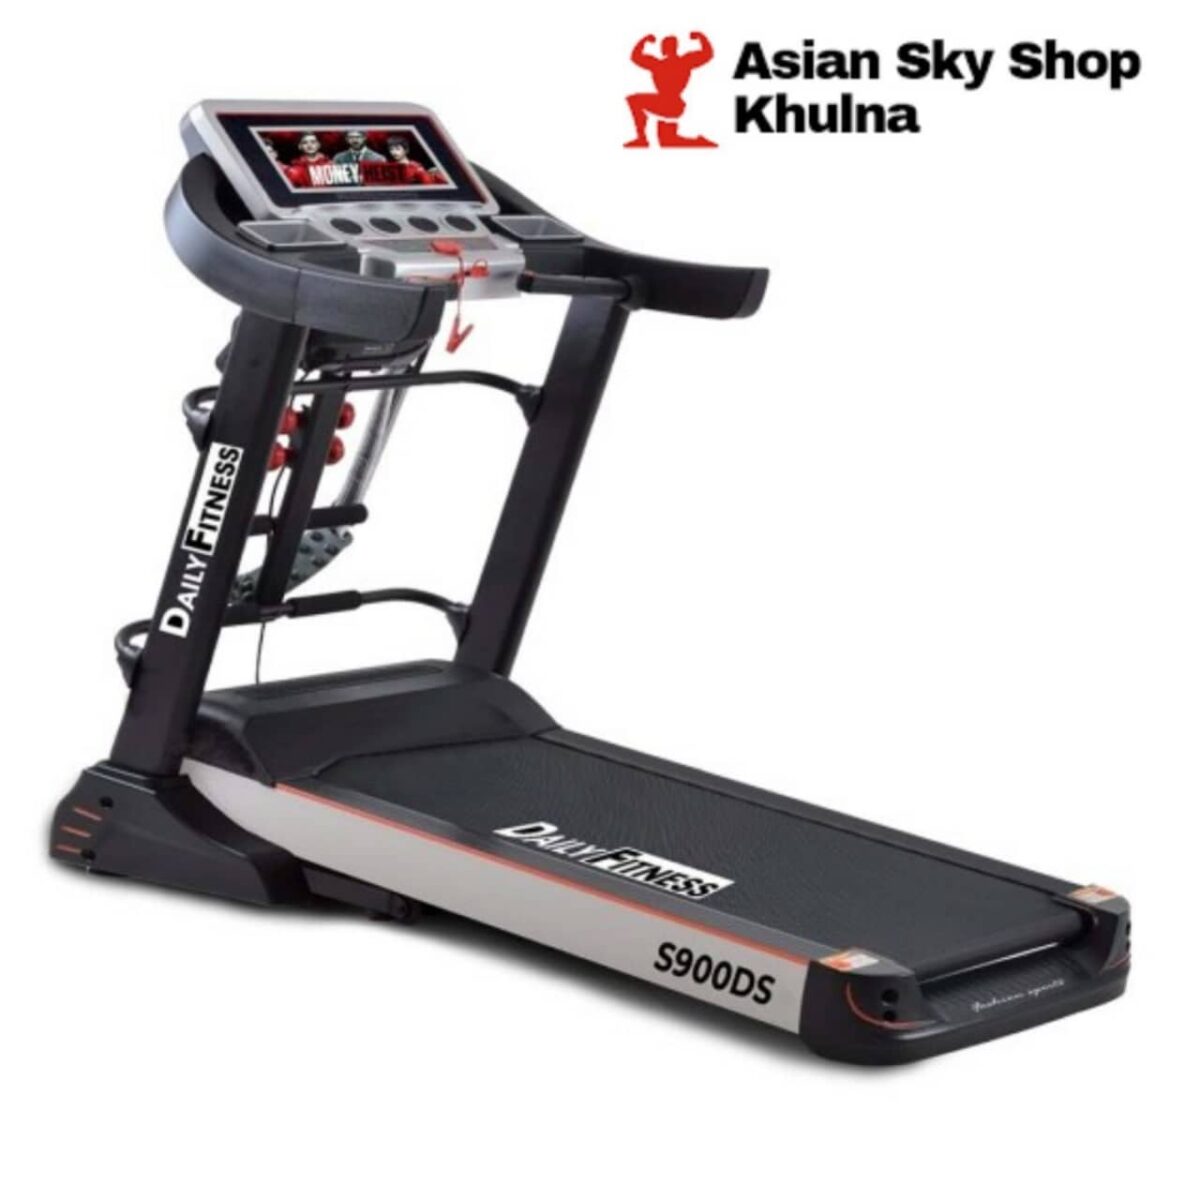 S800DS (Motor 2.5HP) Android Intelligent Motorized Treadmill Foldable